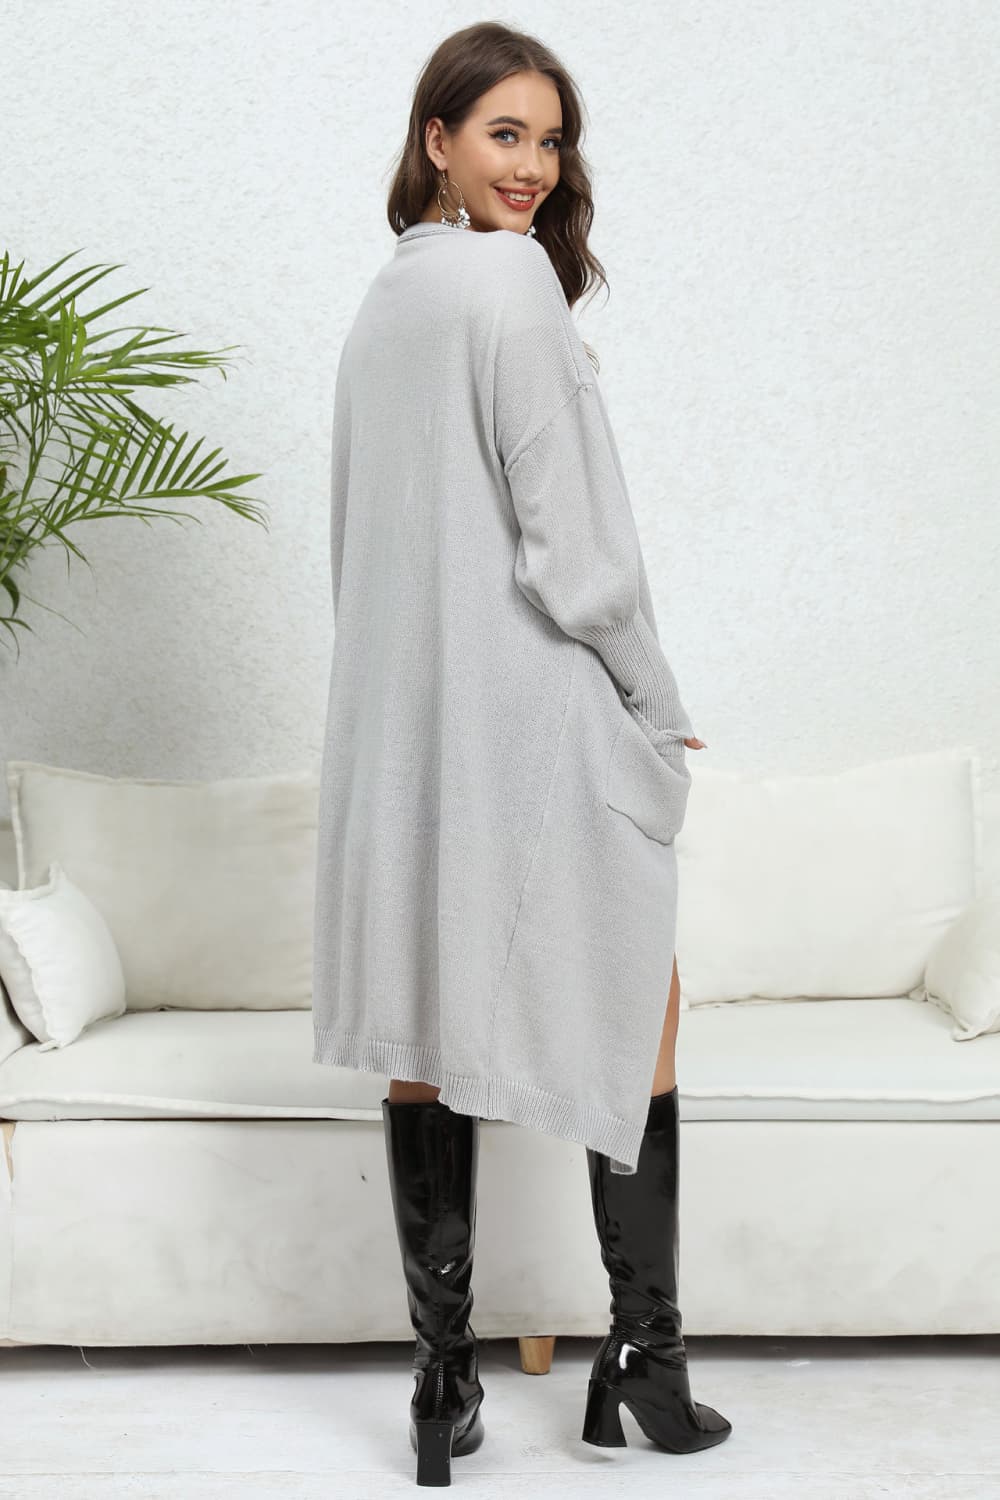 Open Front Dropped Shoulder Cardigan - Kawaii Stop - Cardigan, Cardigans, Casual Style, Easy Care, Effortless Chic, Fashion Forward, Lantern Sleeves, O & Y.M, Pocketed, Polyester, Relaxed Fit, Ship From Overseas, Slightly Stretchy, Solid, Women's Clothing, Women's Fashion